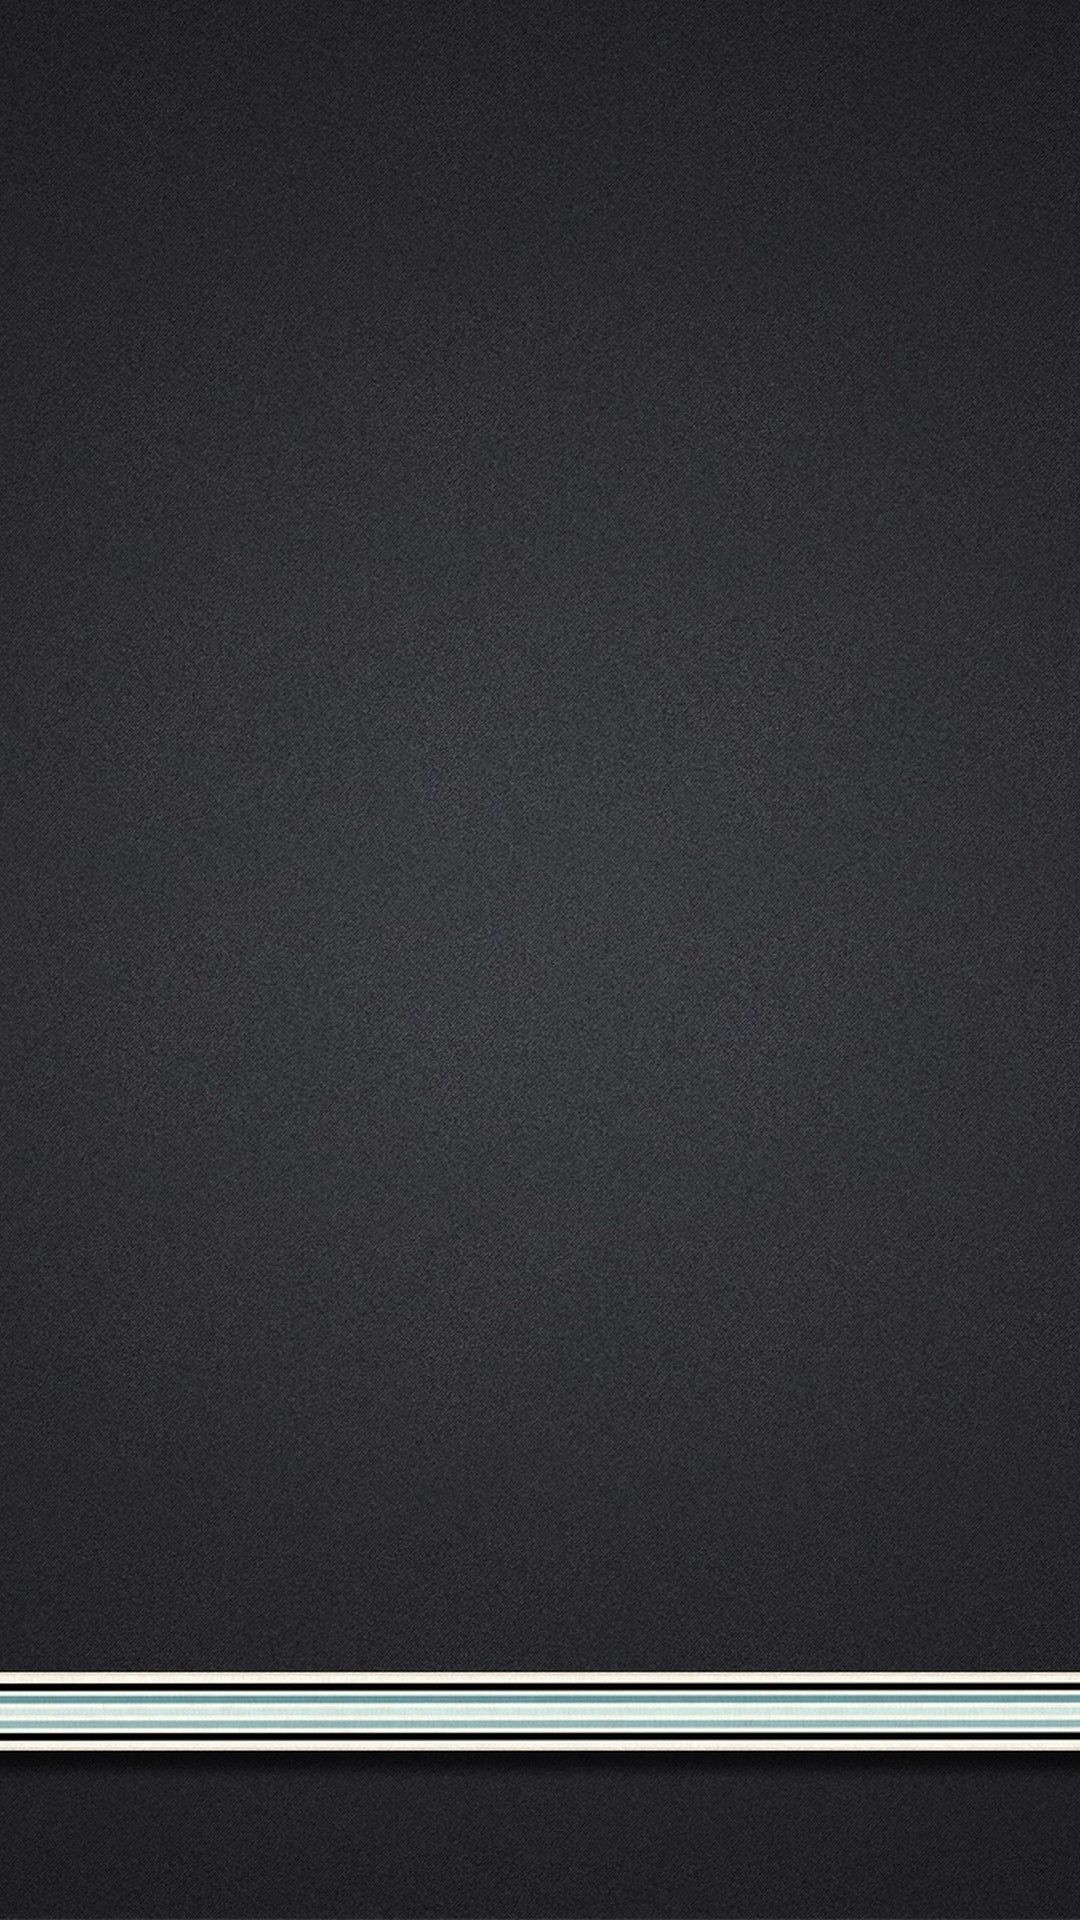 Stripe Mobile Backgrounds